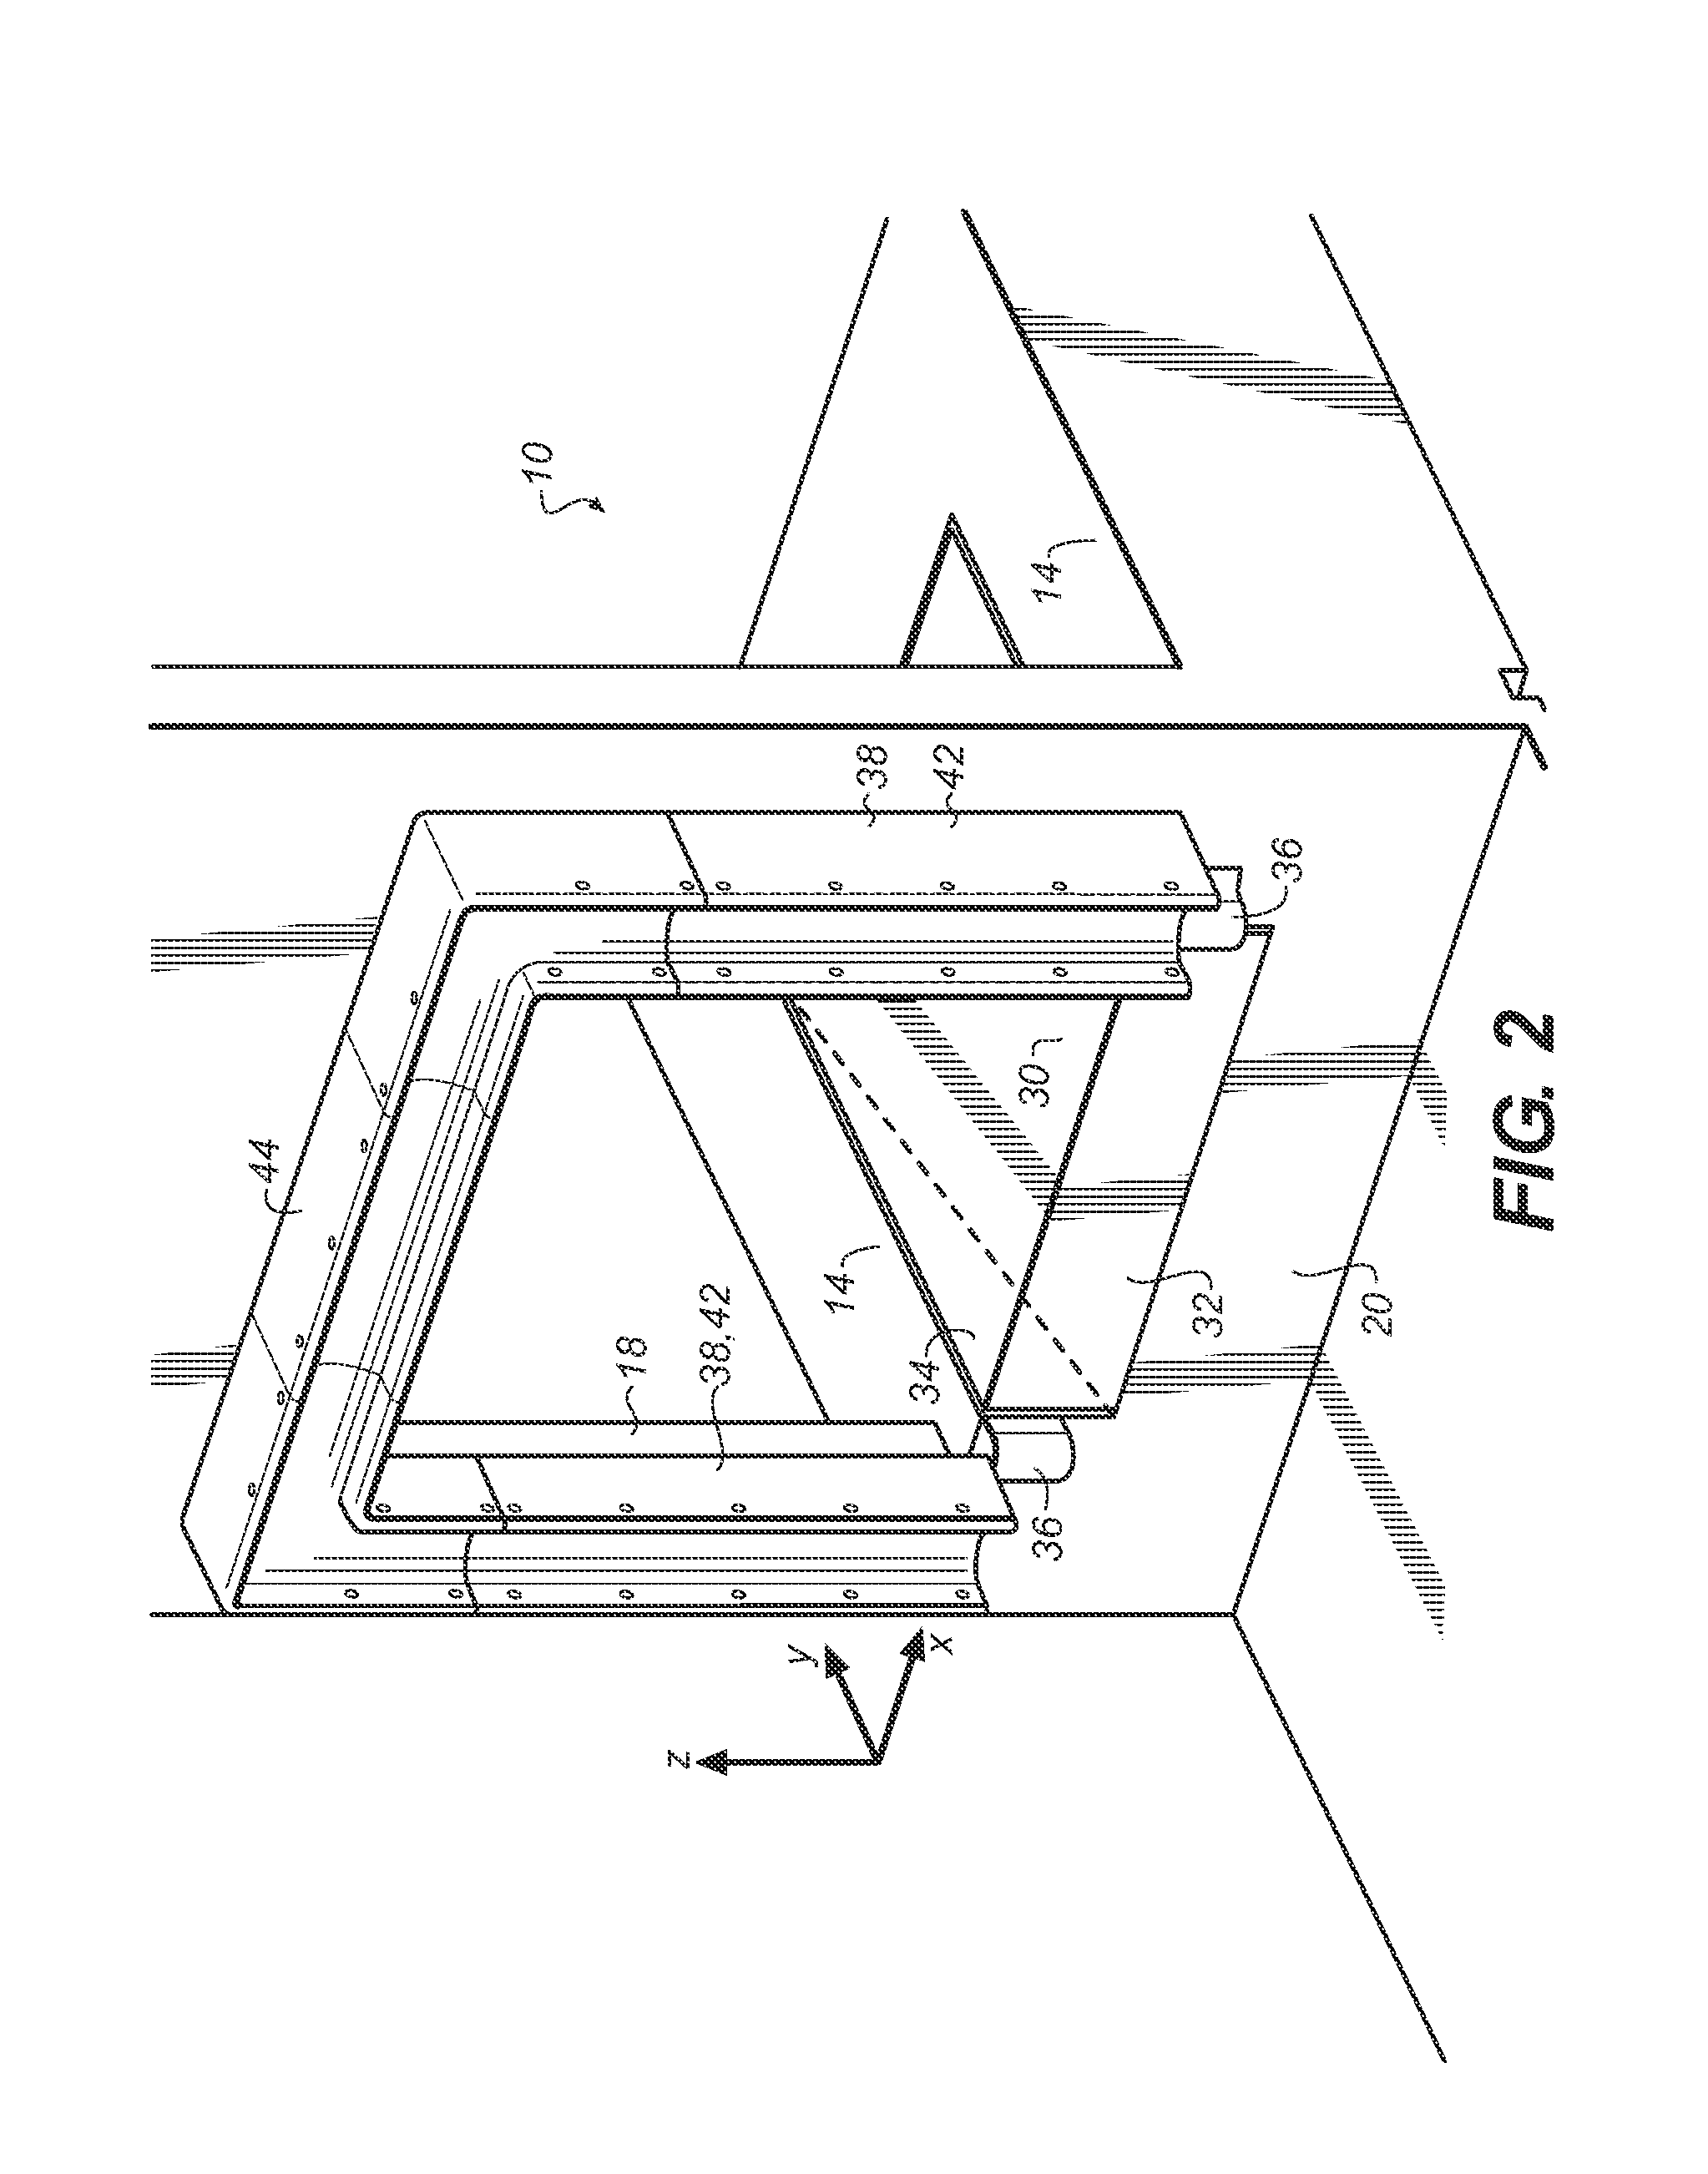 Apparatus and method for sealing a dock leveler assembly